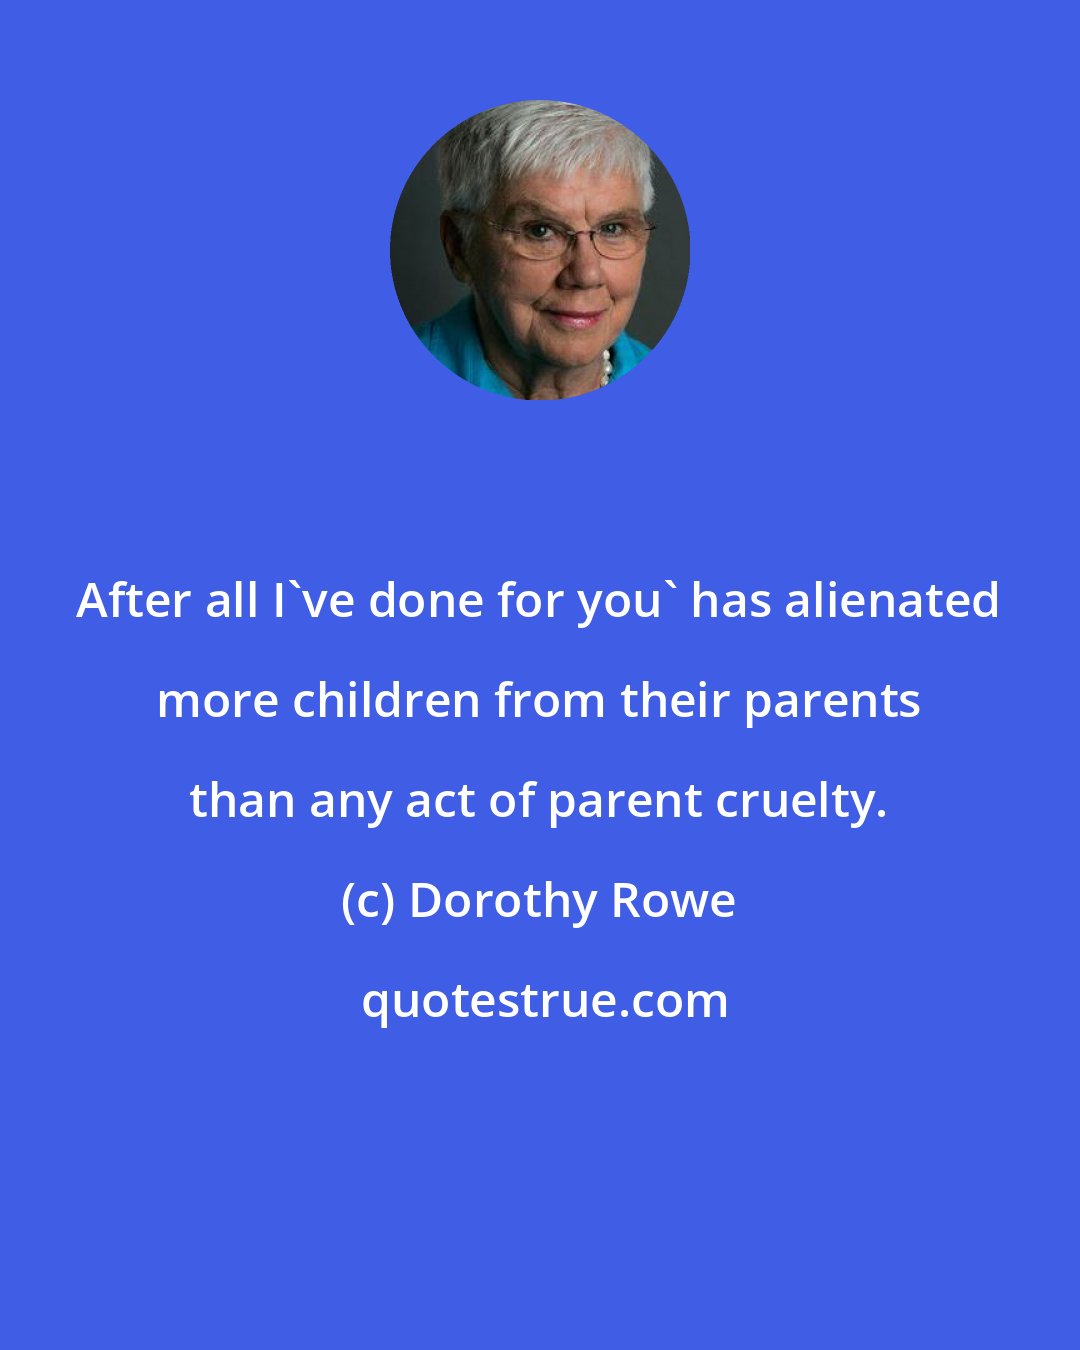 Dorothy Rowe: After all I've done for you' has alienated more children from their parents than any act of parent cruelty.